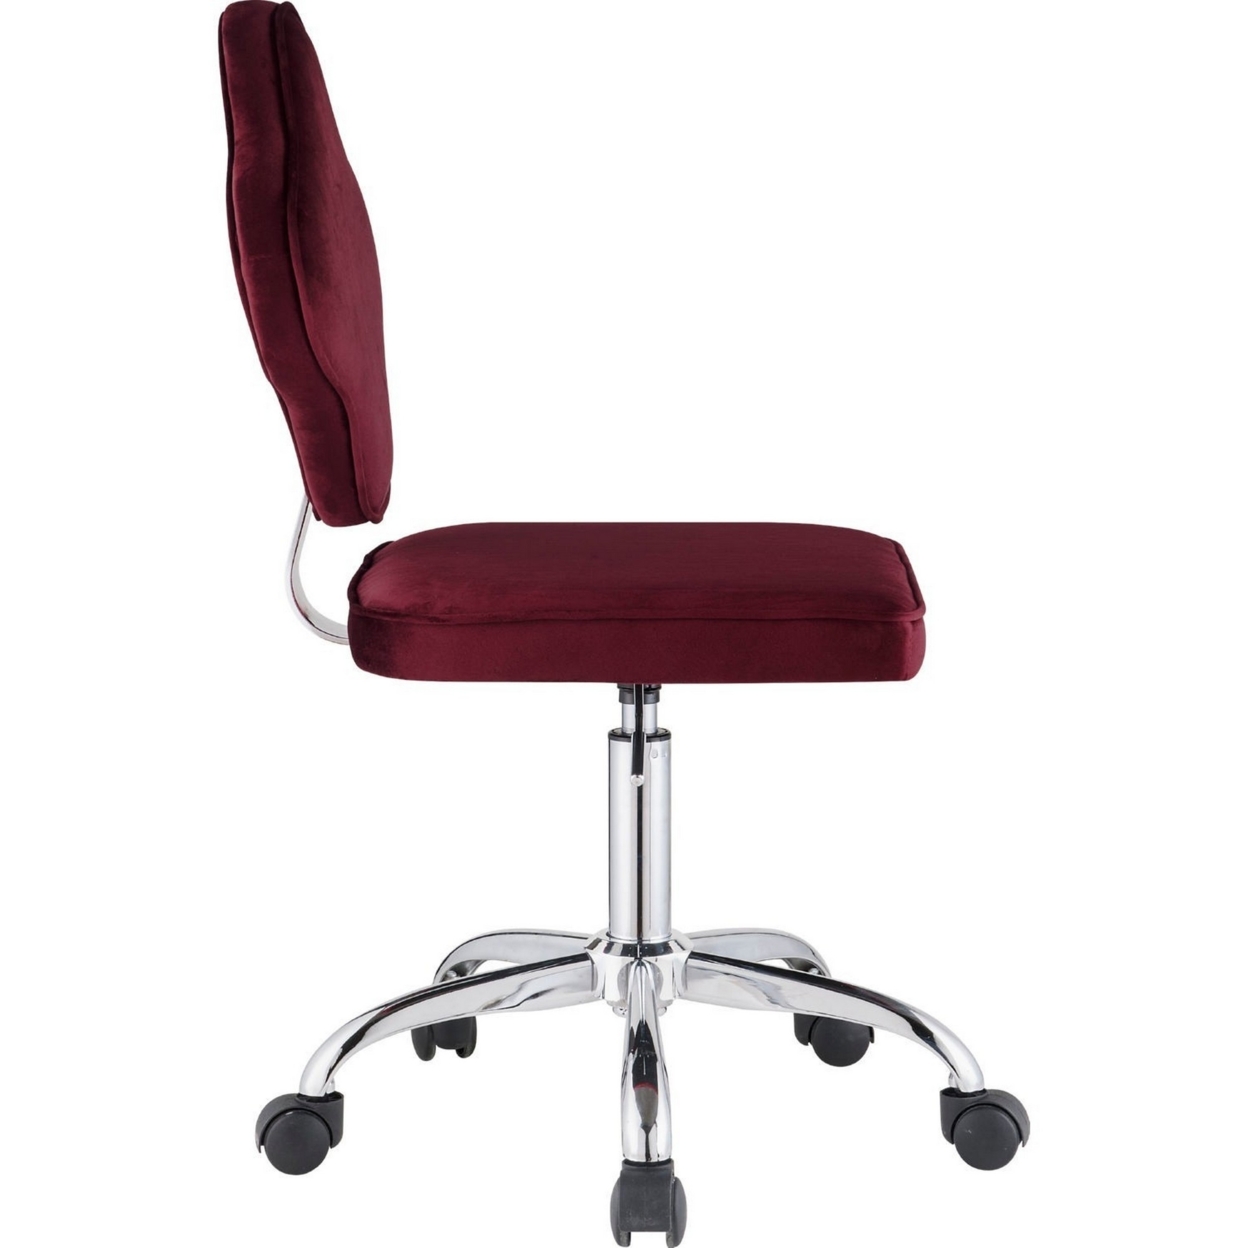 Office Chair With Leaf Shape Back And Metal Star Base, Red- Saltoro Sherpi